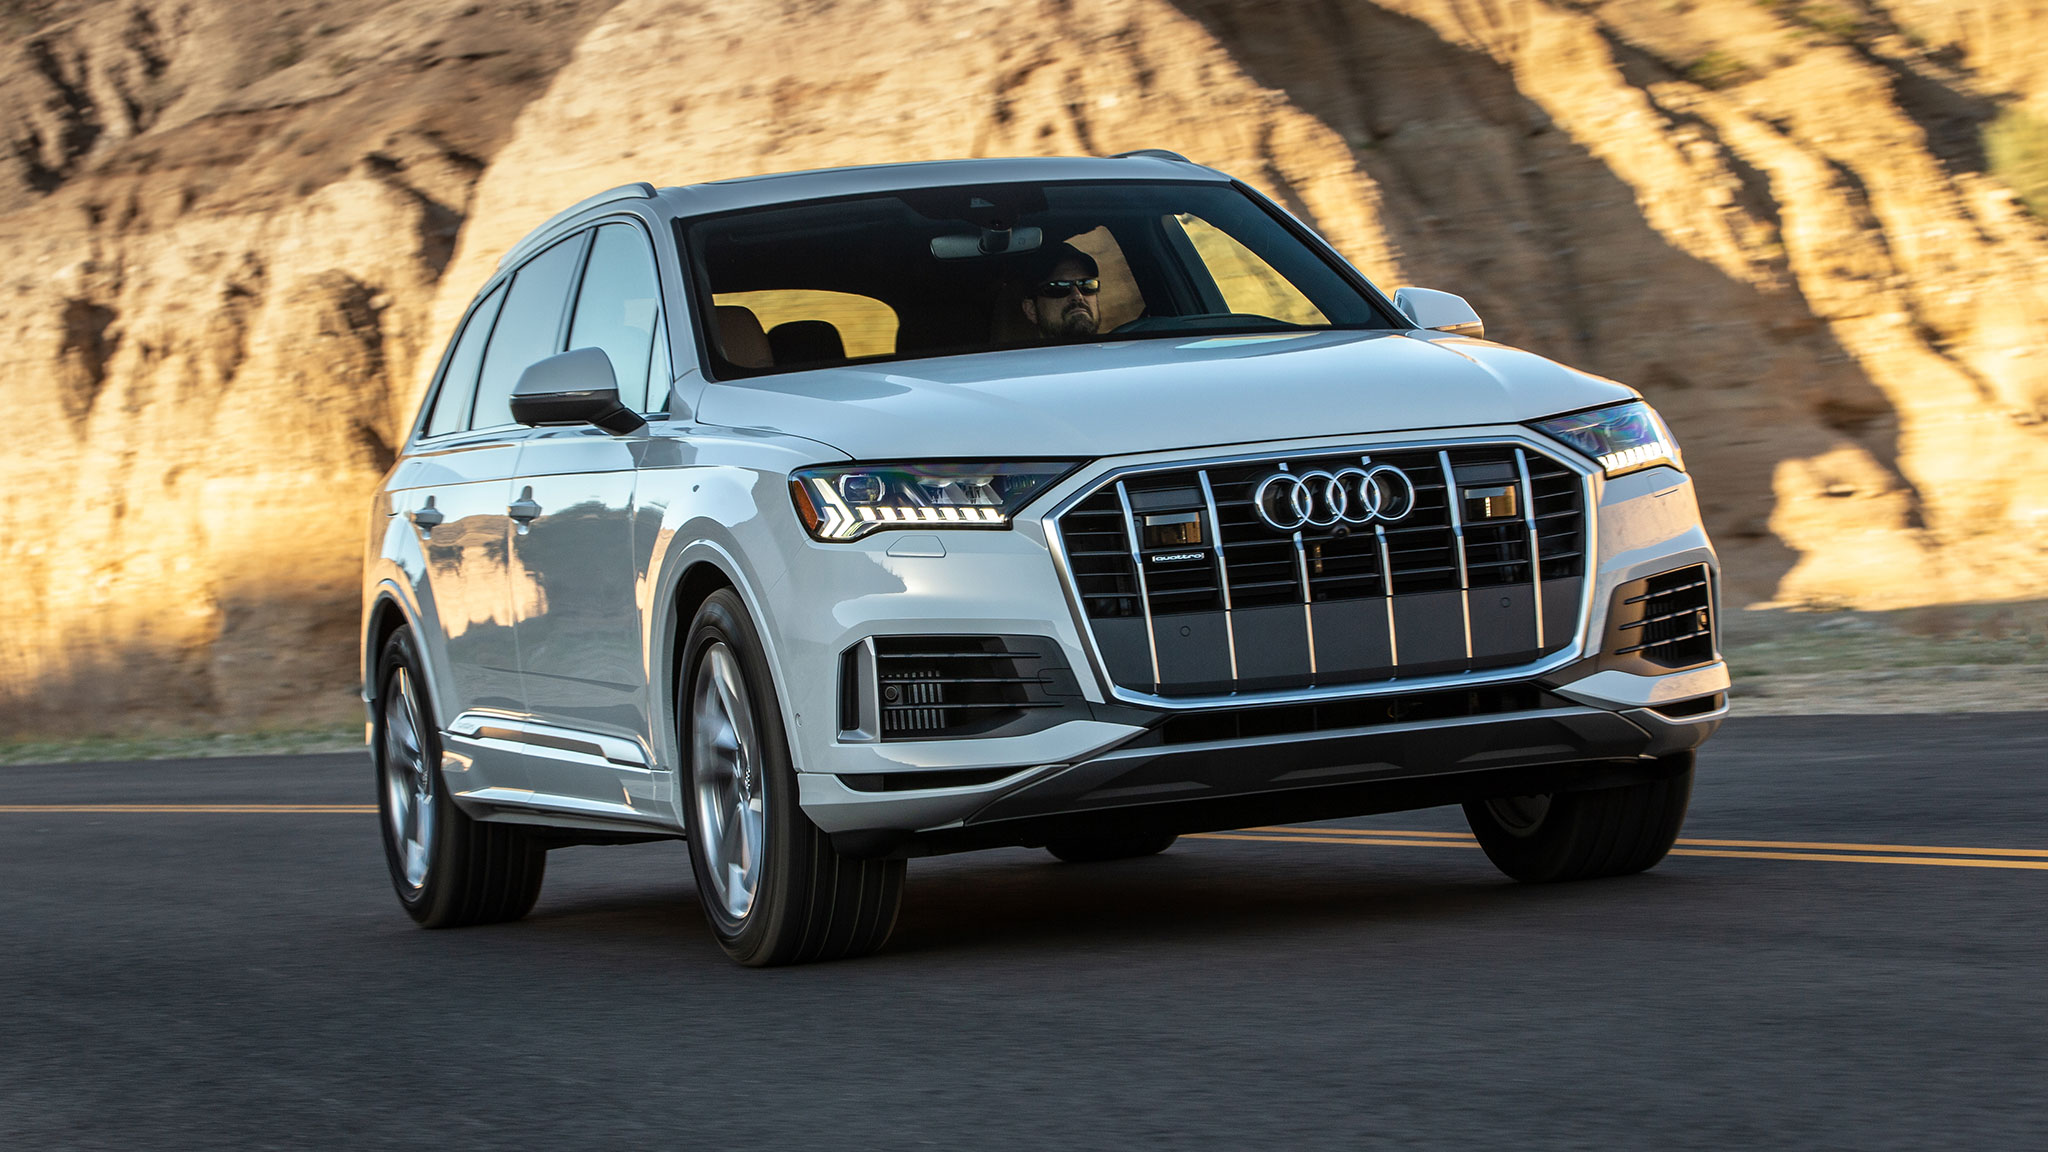 How Much Is It To Ride A Audi Q7 In Dubai 